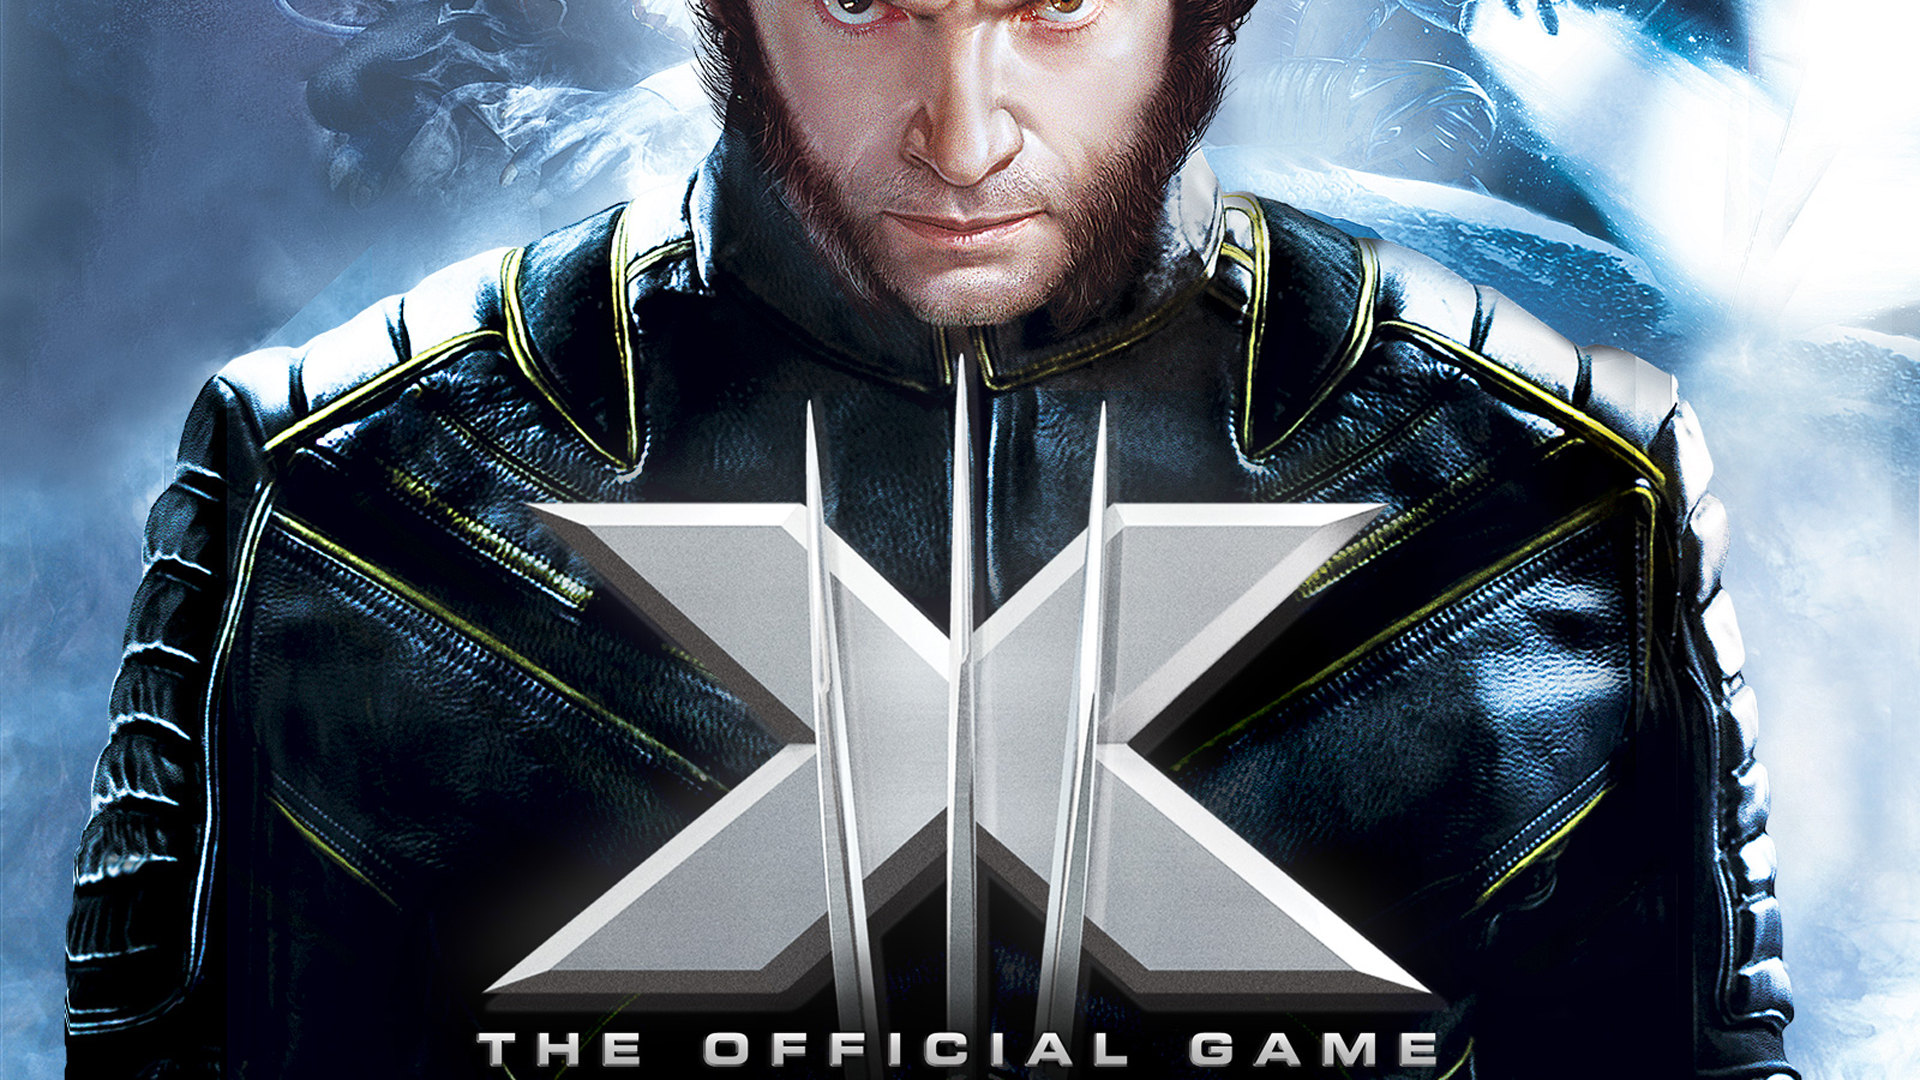 Video Game X-Men: The Official Game HD Wallpaper | Background Image